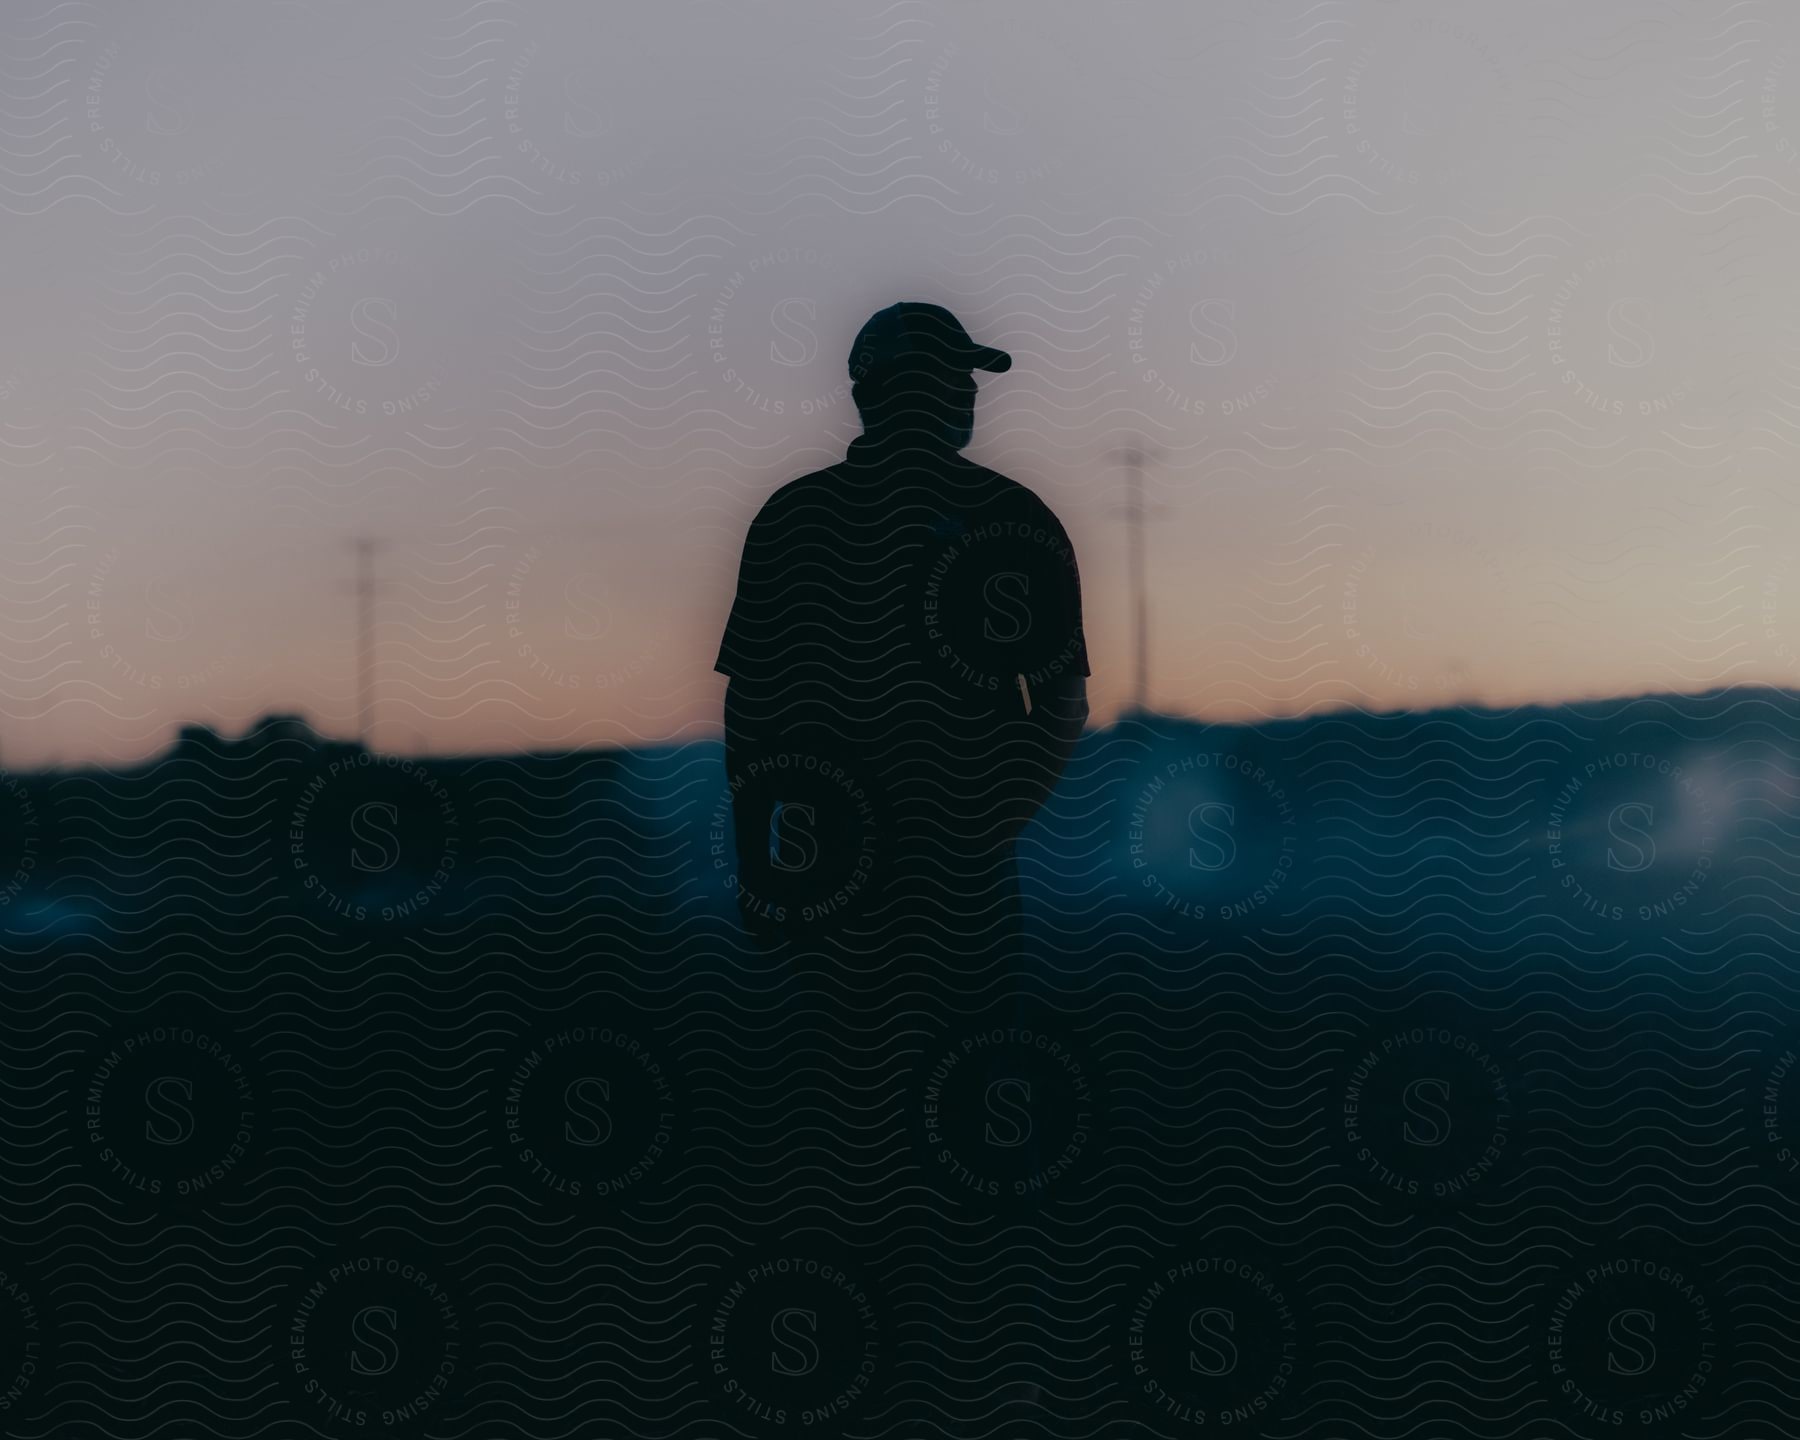 Stock photo of a man in a baseball cap stands in the fog-shrouded darkness of a grassy field.